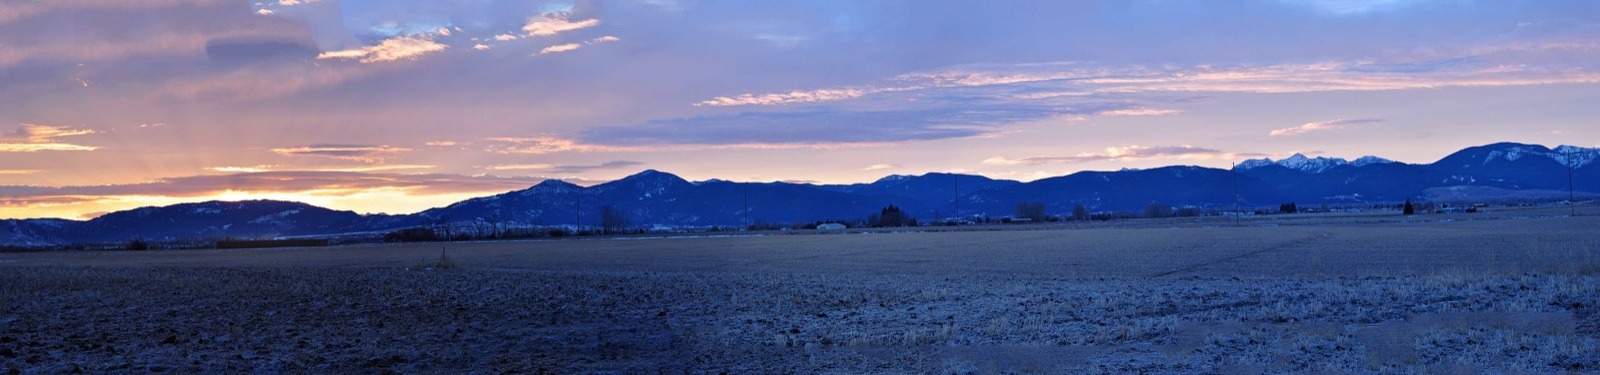 Sunrise comes to Bozeman and the rapidly growing Gallatin Valley with the Gallatin Mountains rising in the distance south of one of America's fastest-growing micropolitan cities.  Photo courtesy Mike Cline/Wikipedia/https://creativecommons.org/licenses/by-sa/4.0